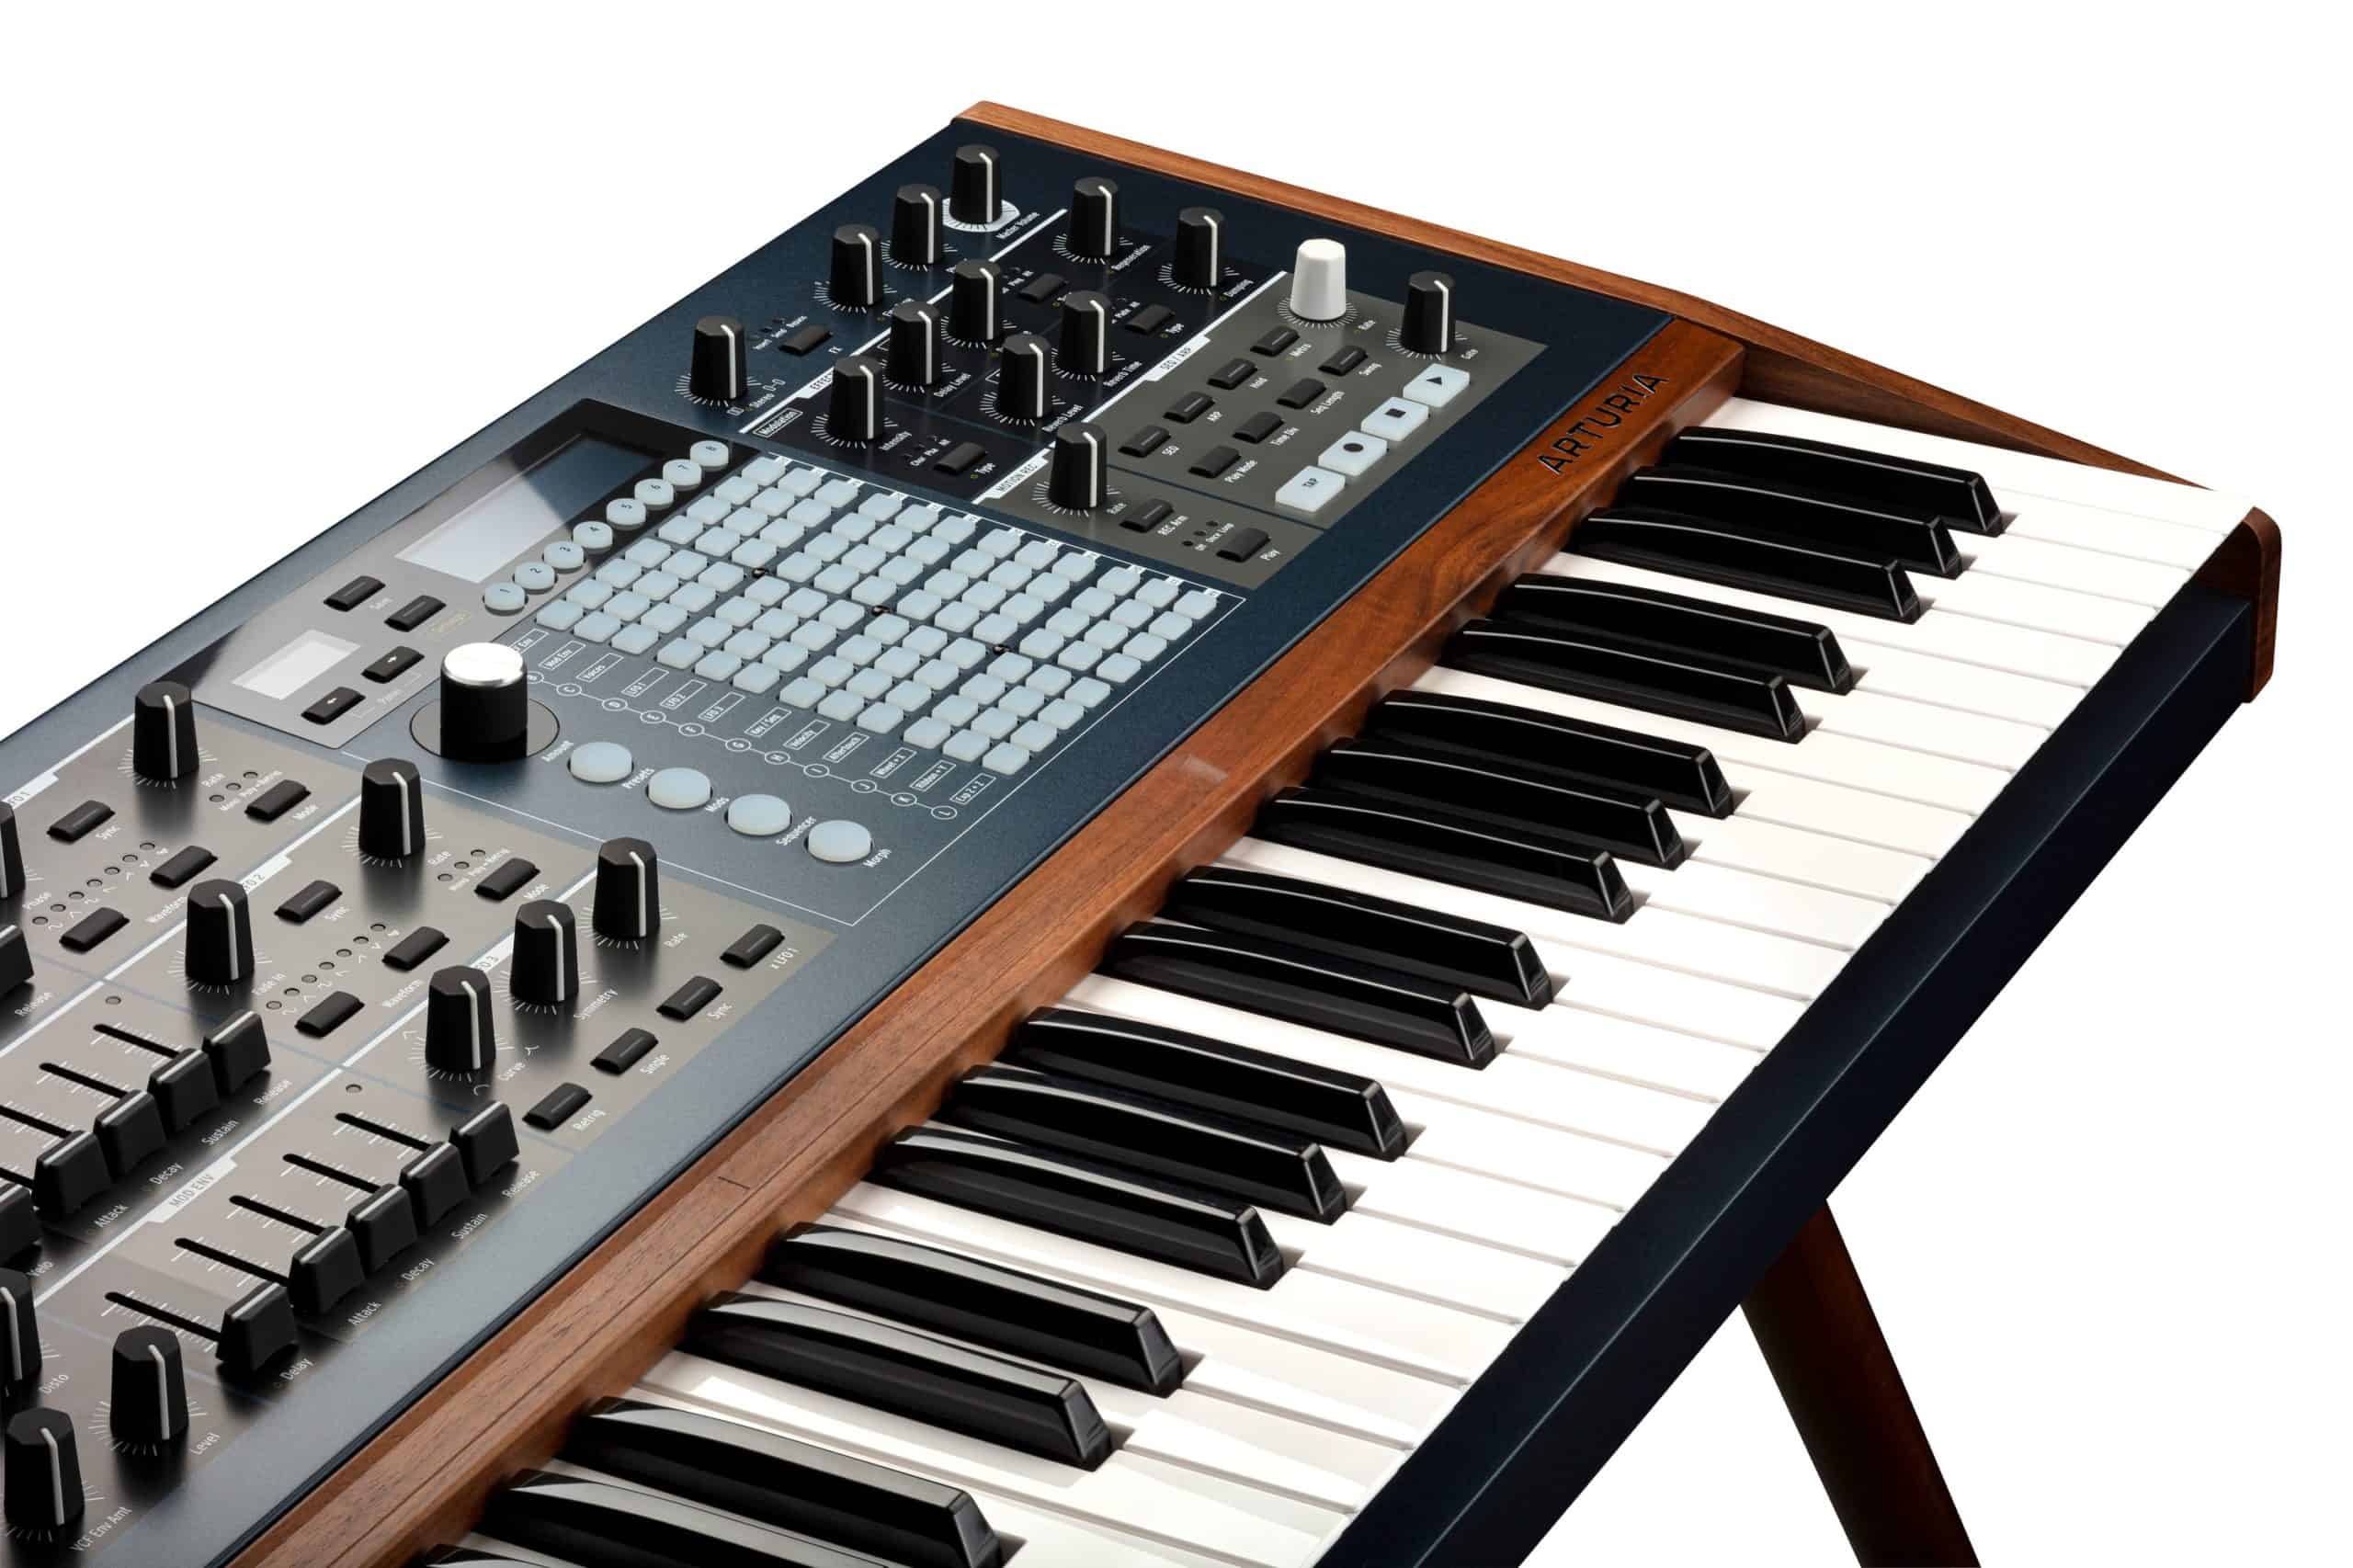 PolyBrute Arturia’s New Expansive Synthesizer